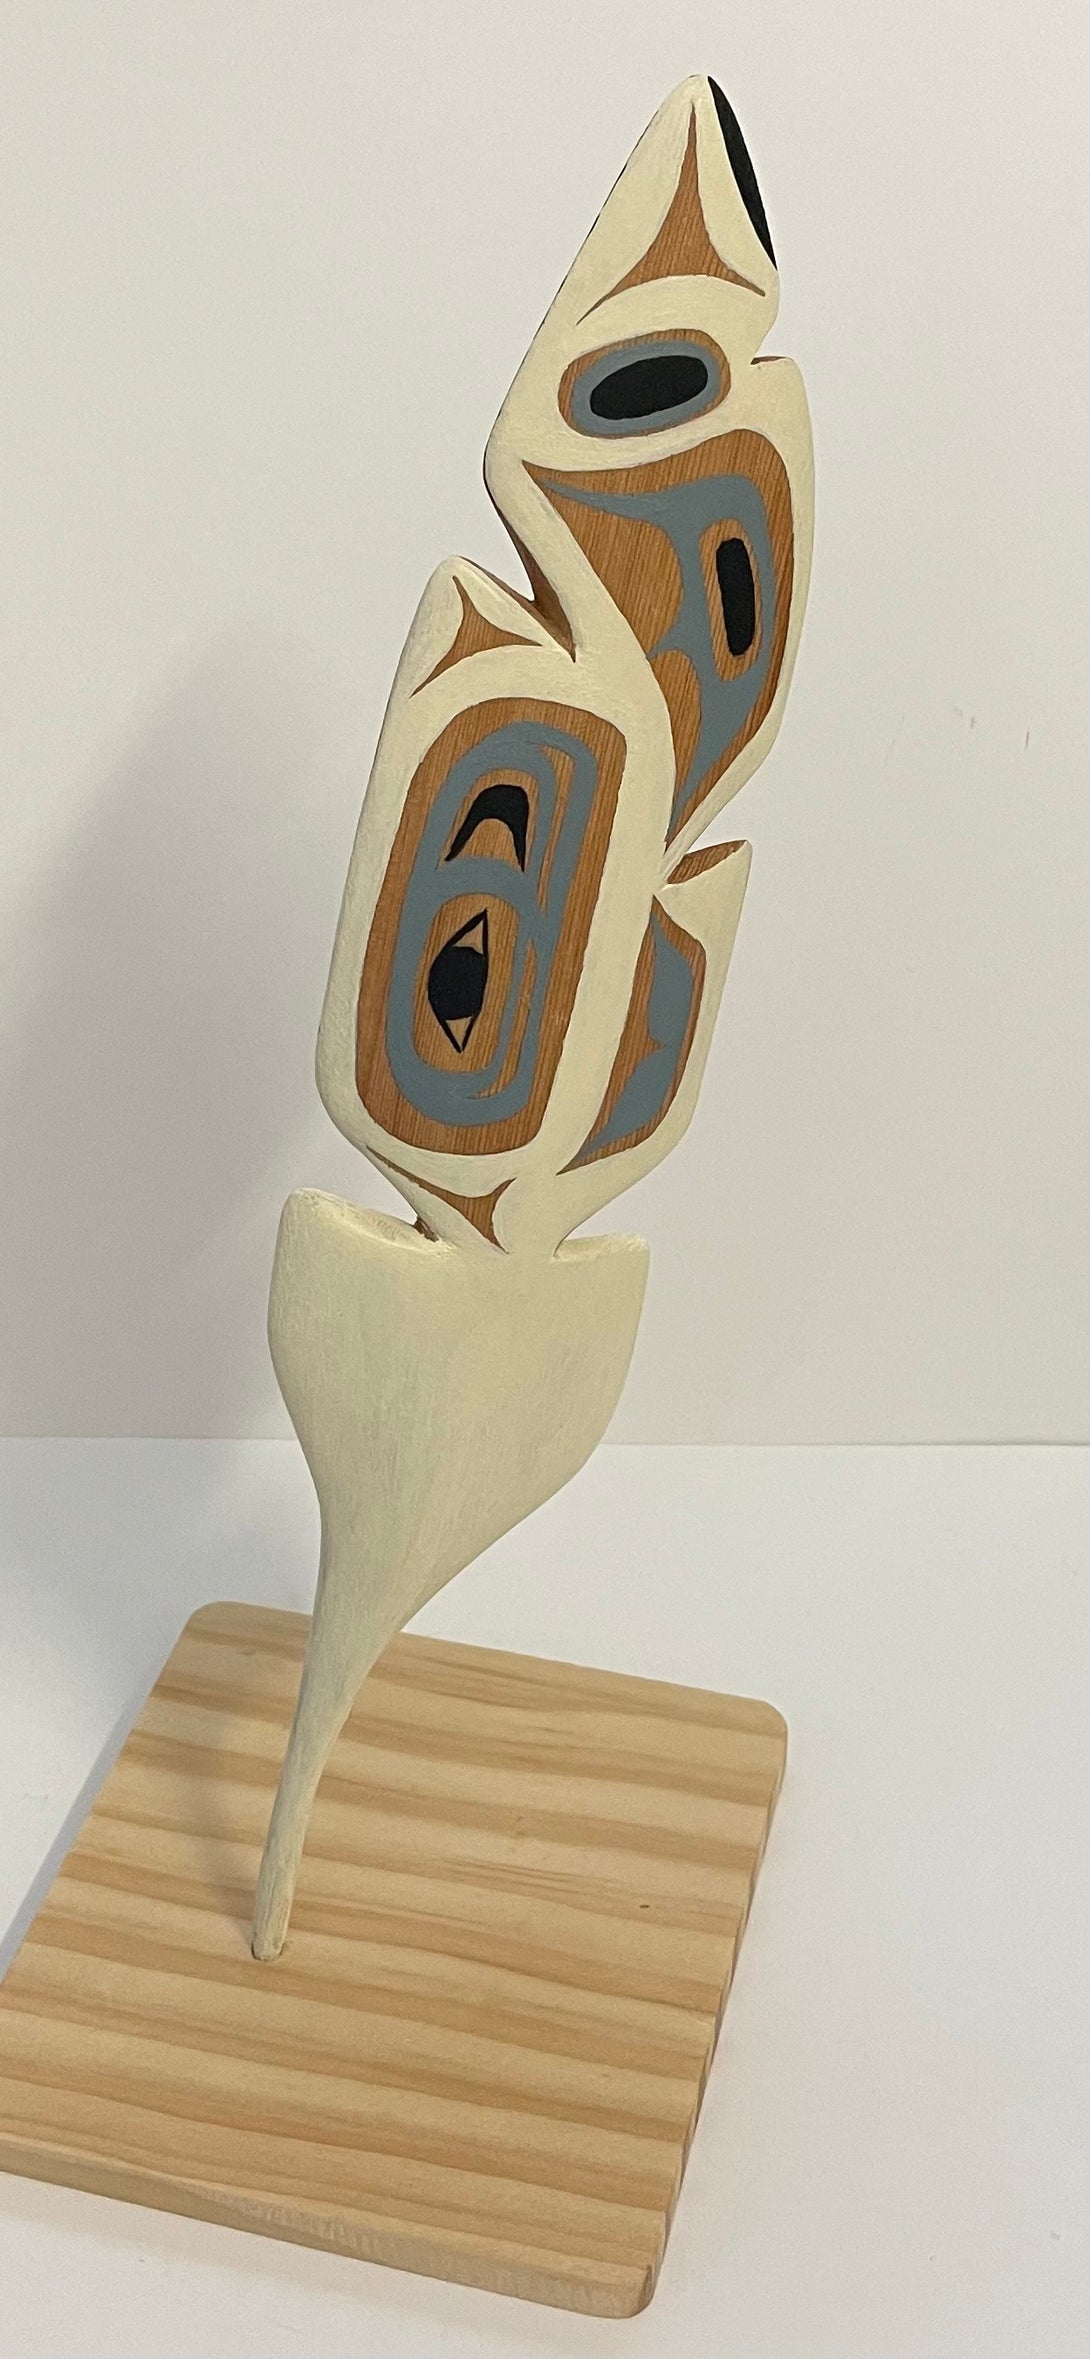 Mike Bellis - Carving - White , Blue & Black Abstract Feather with base - Mike Bellis - McMillan Arts Centre Gallery, Gift Shop and Box Office - Vancouver Island Art Gallery